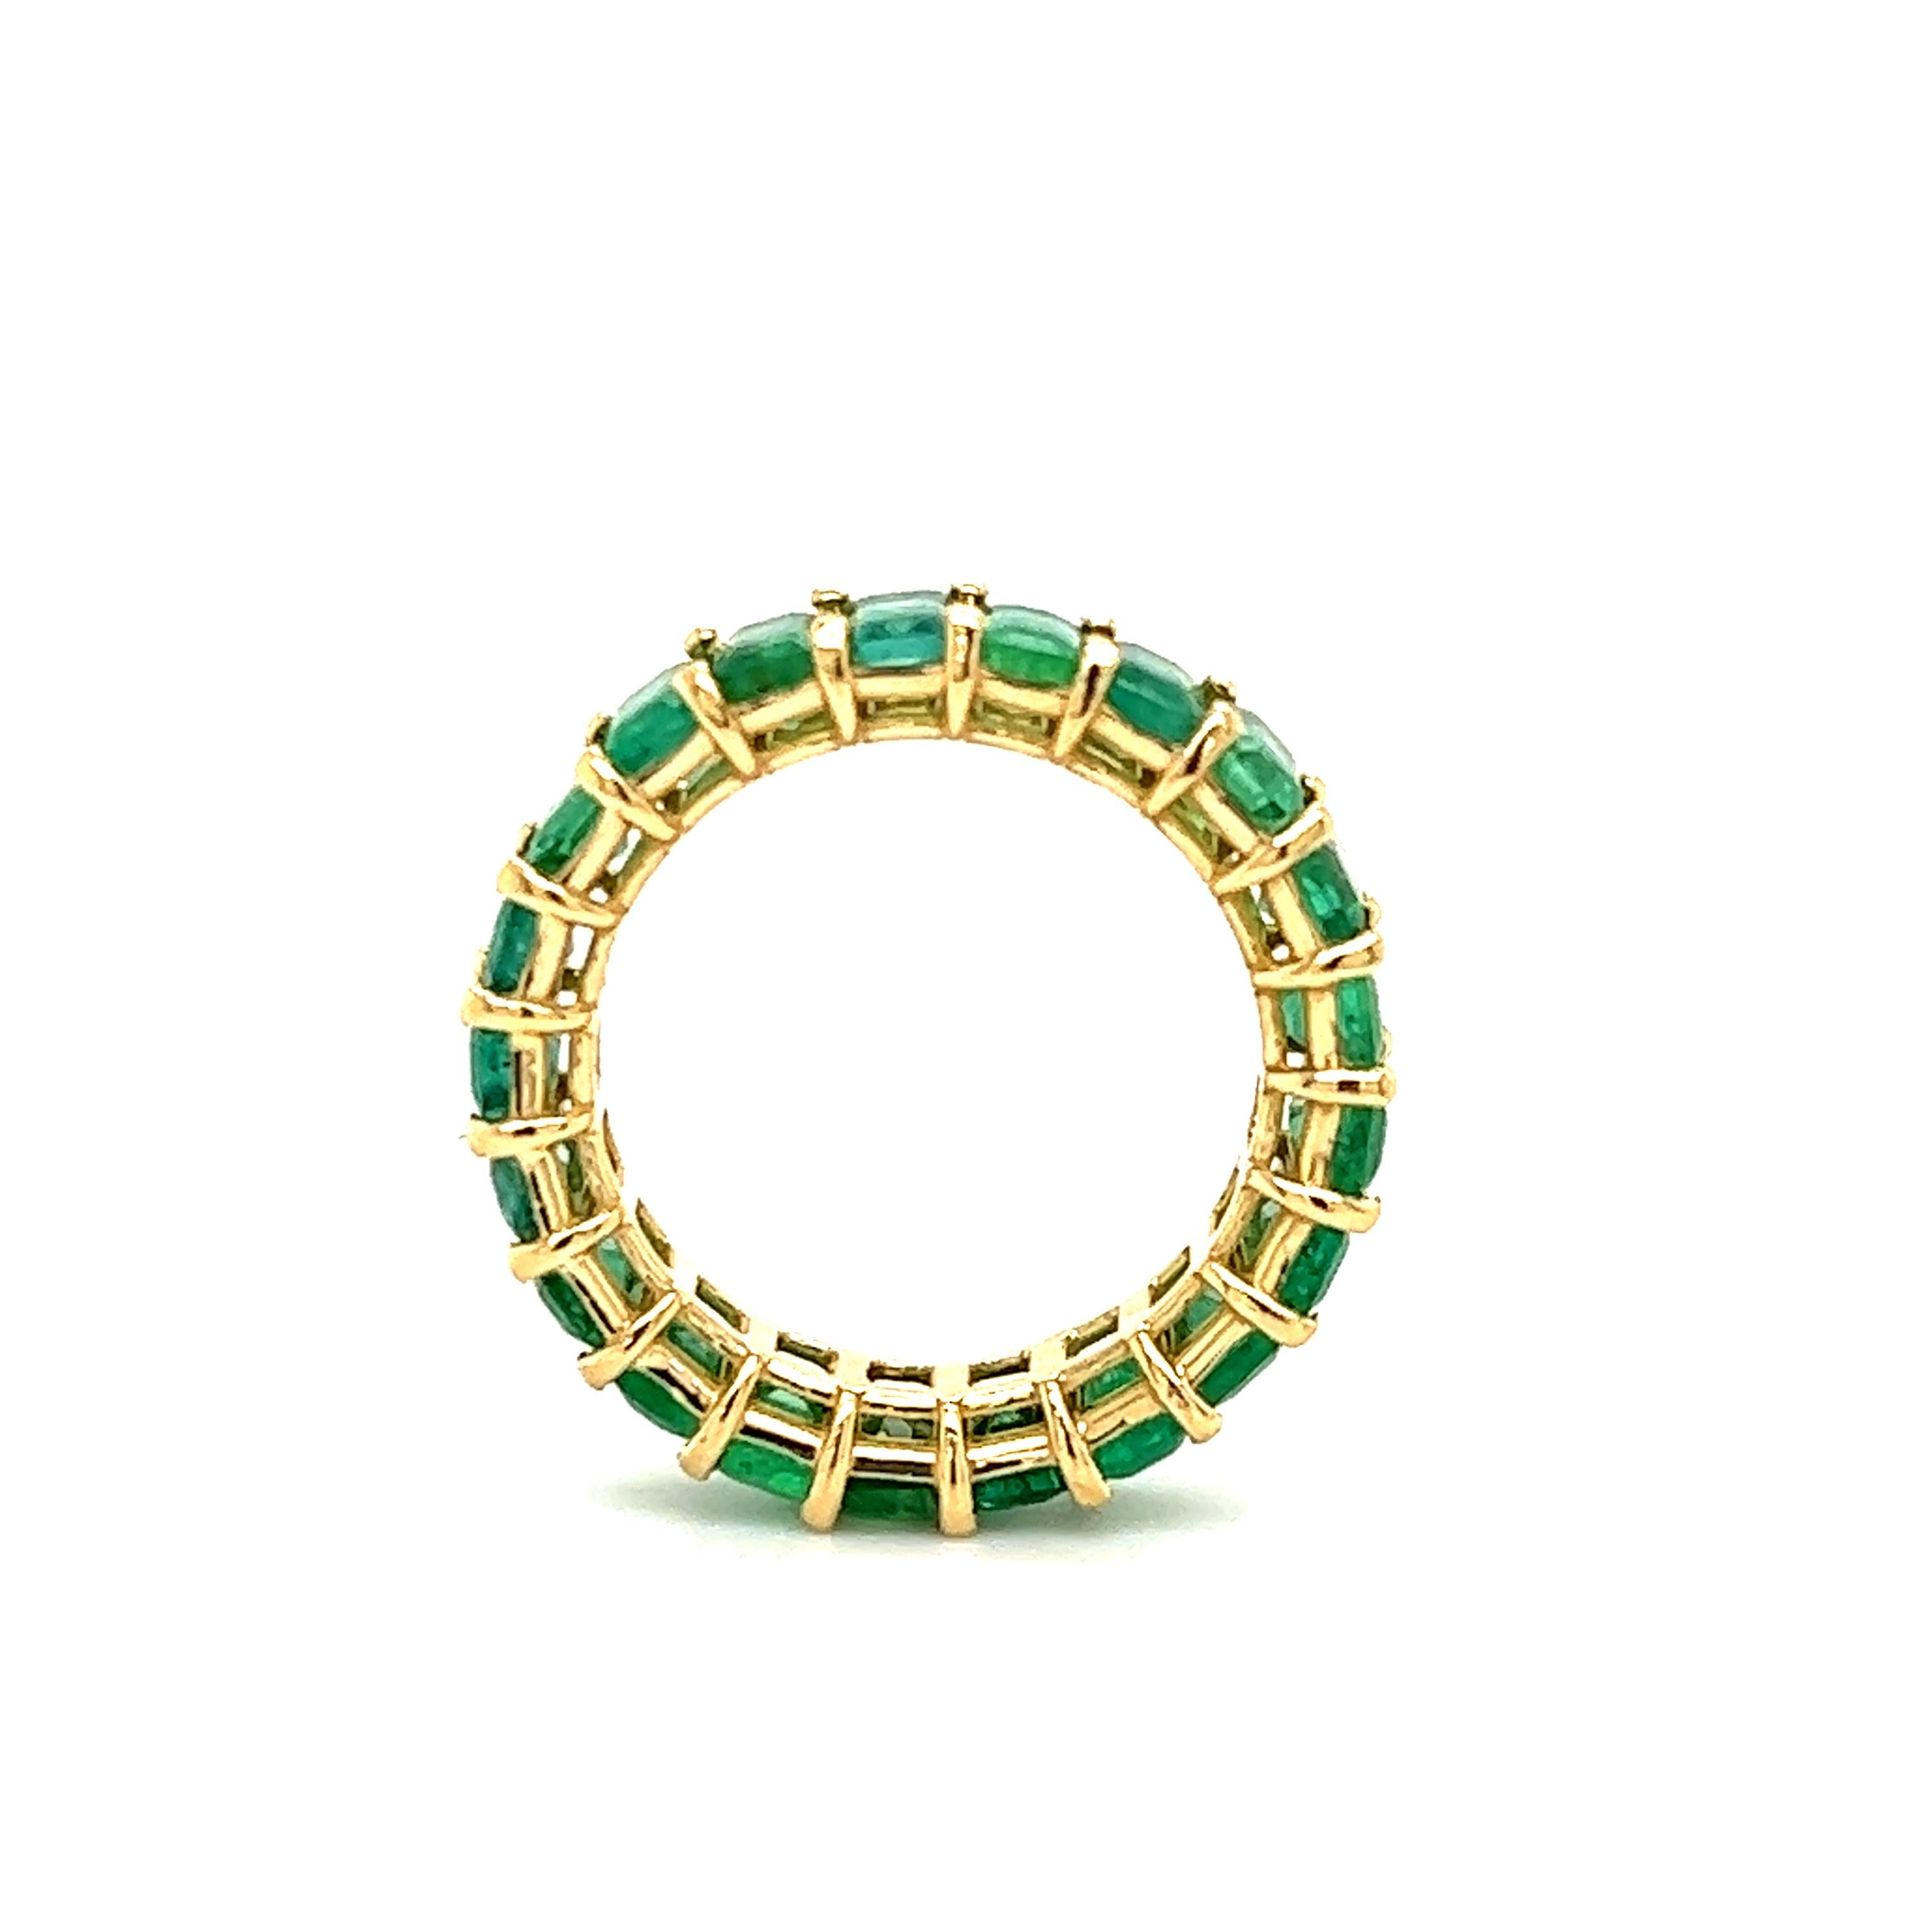 Amazing hand crafted 18k yellow gold Colombian Emerald eternity band. This ring is truly breathtaking. Each stone was matched to perfection to create this one of a kind ring. Twenty one Emeralds are set into this band, all showing a vibrant green